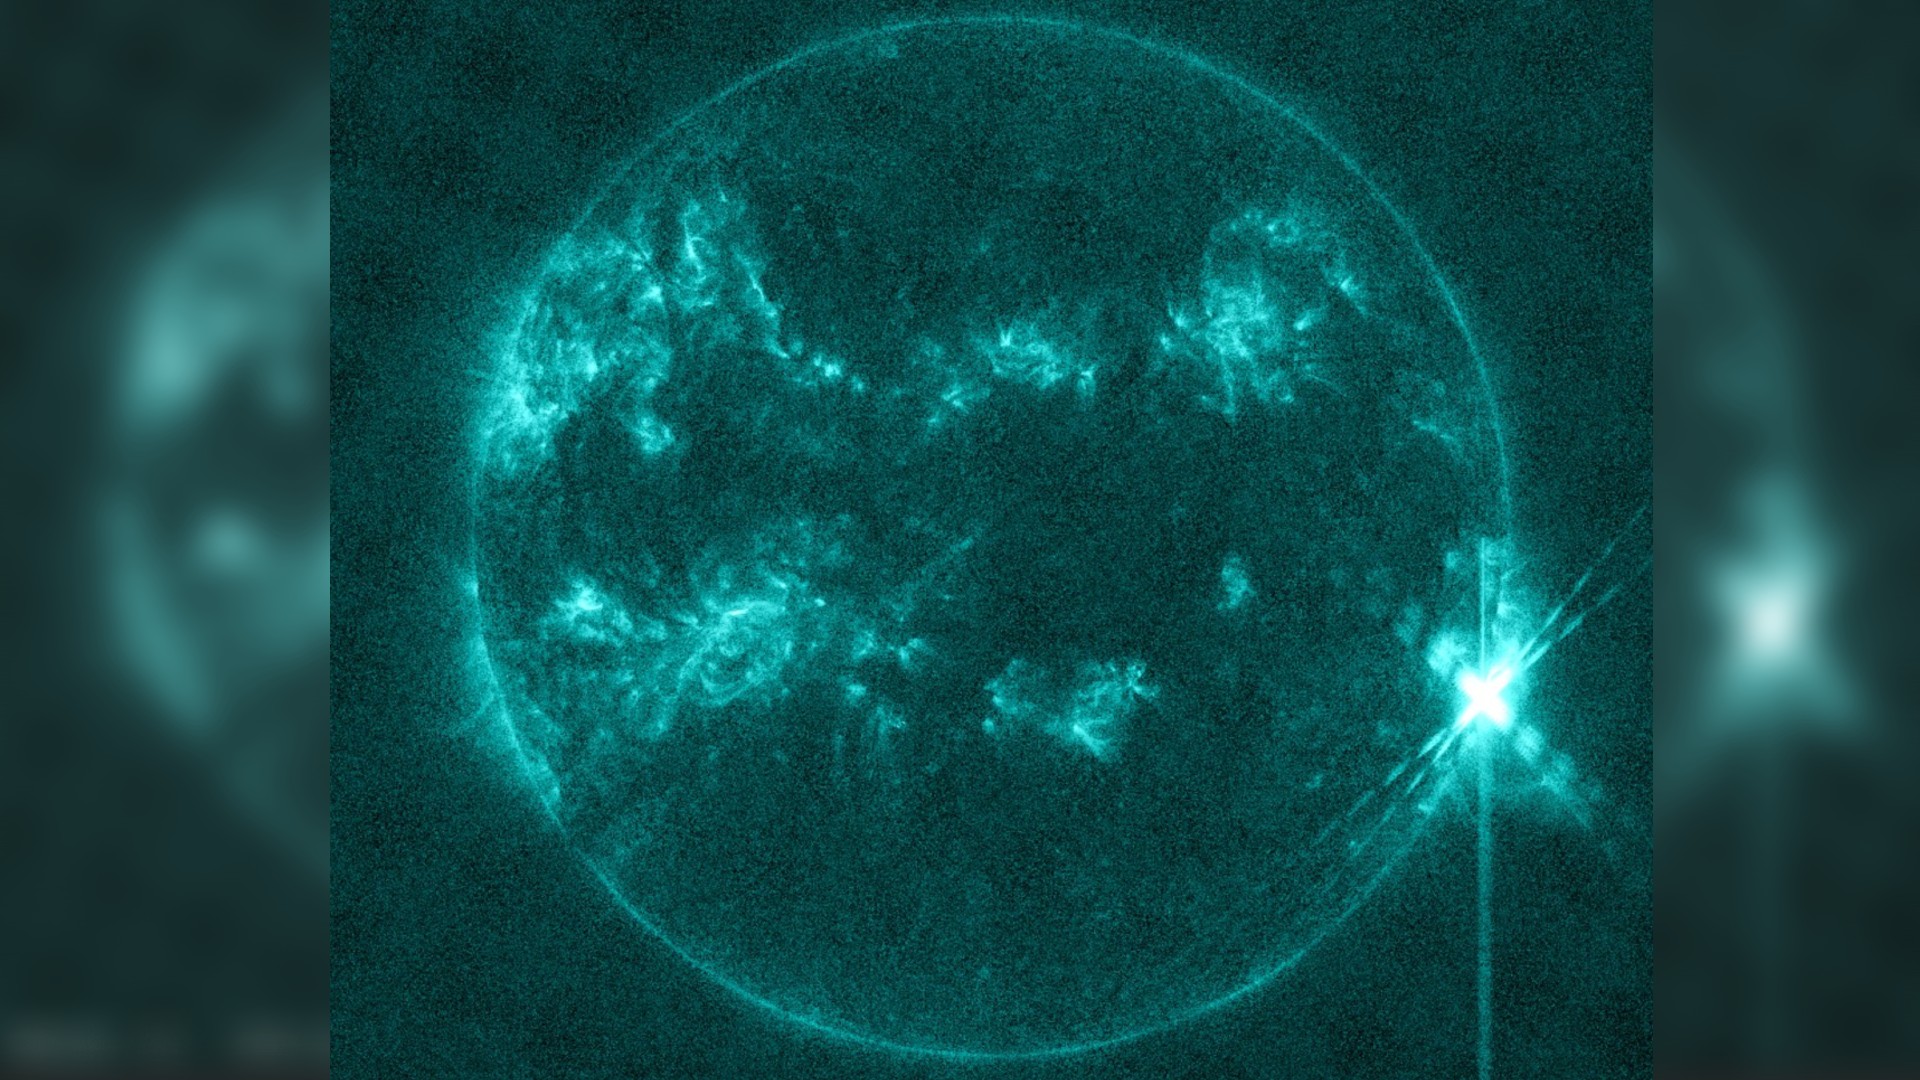 Sun unleashes massive X8.7 solar flare, biggest of current cycle, from super-active monster sunspot (video) Space